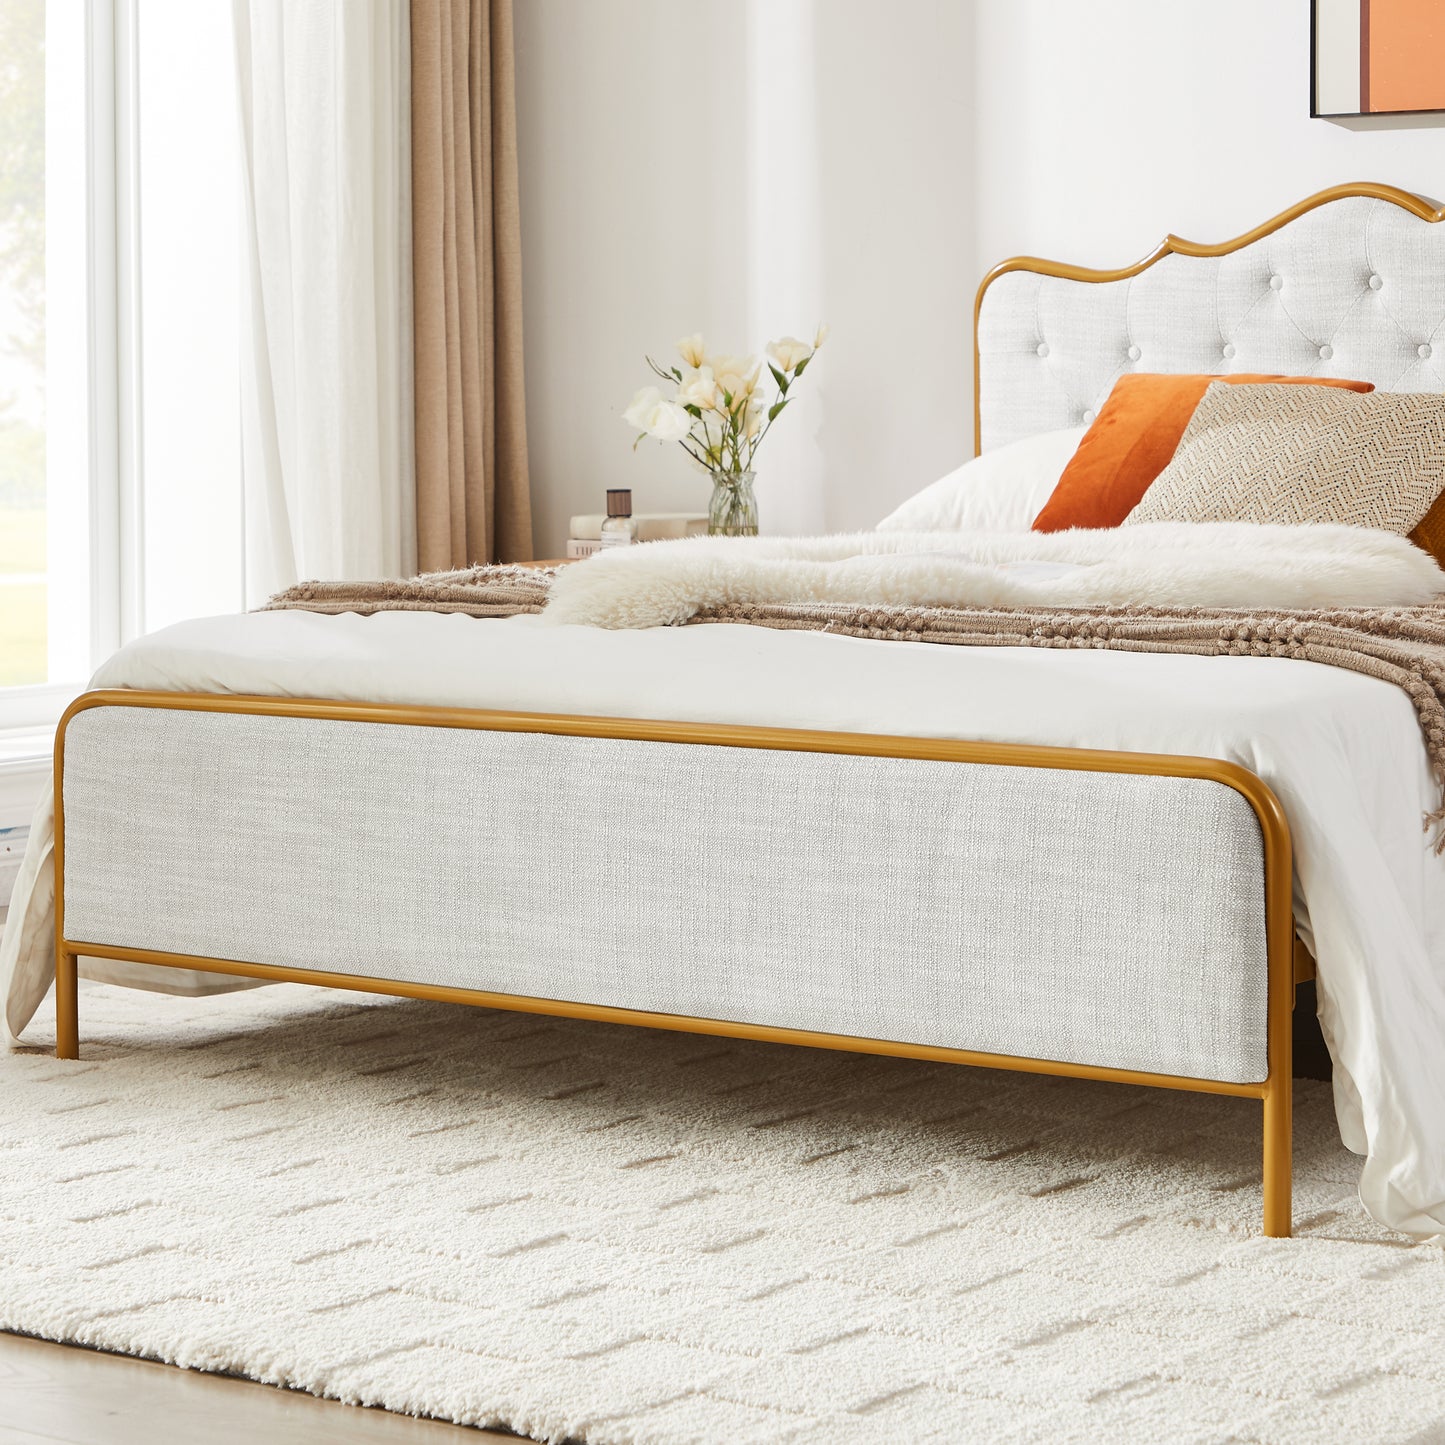 Full Size Upholstered Platform Bed with 4 Storage Drawers, Classic Steamed Bread Shaped Backrest, Light Gray